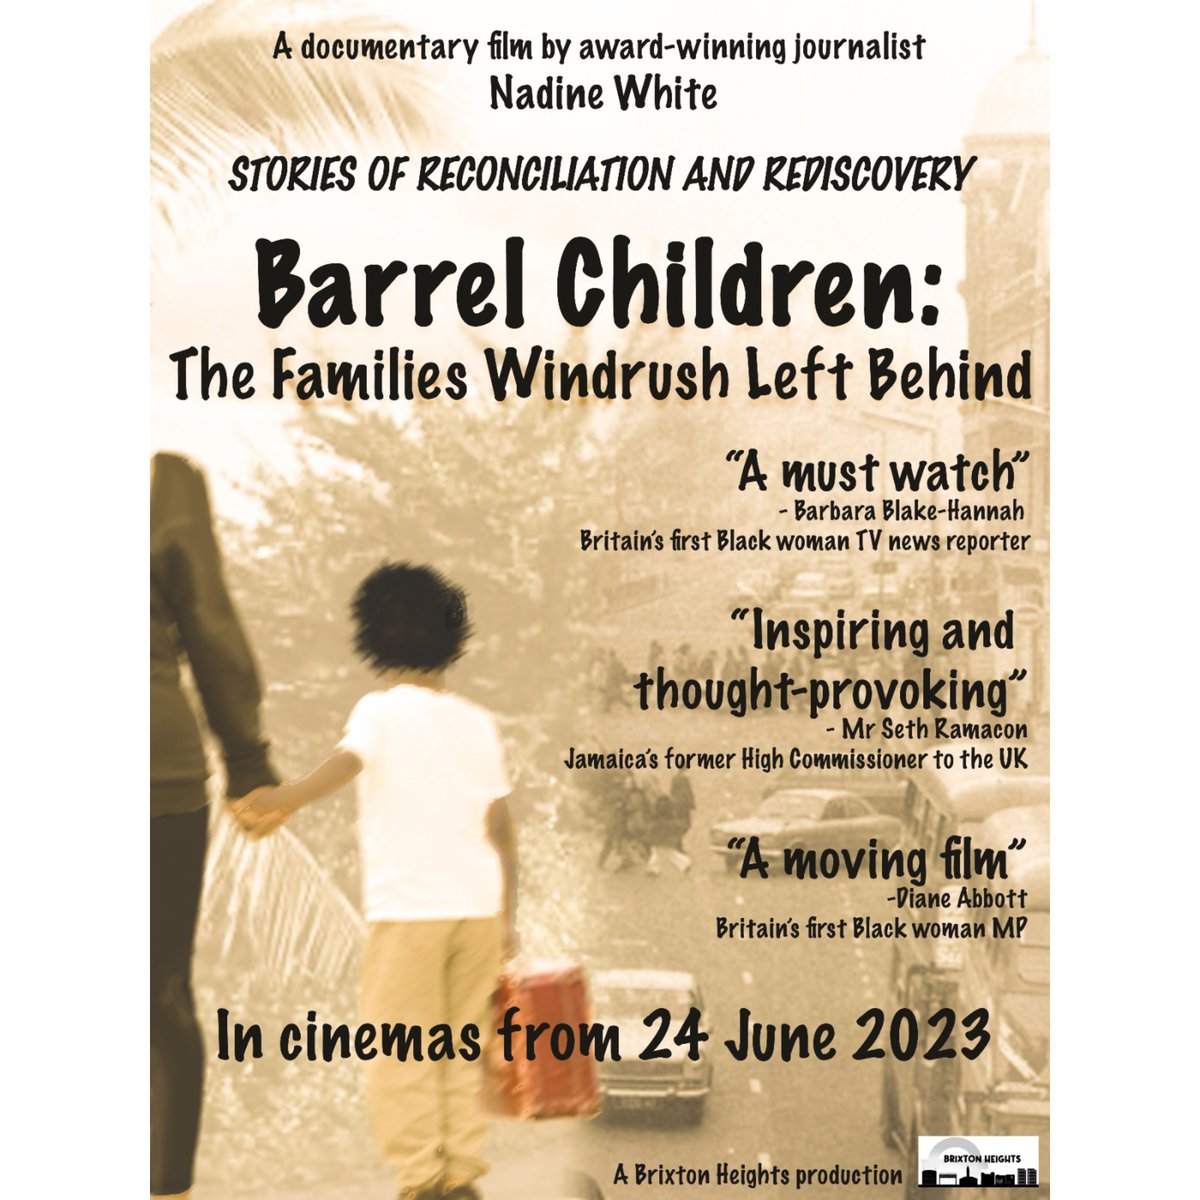 'Barrel Children: The Families Windrush Left Behind', my first feature-length documentary, will be showing at selected UK cinemas between Saturday 24 June & Wednesday 28 June 2023. #Windrush75